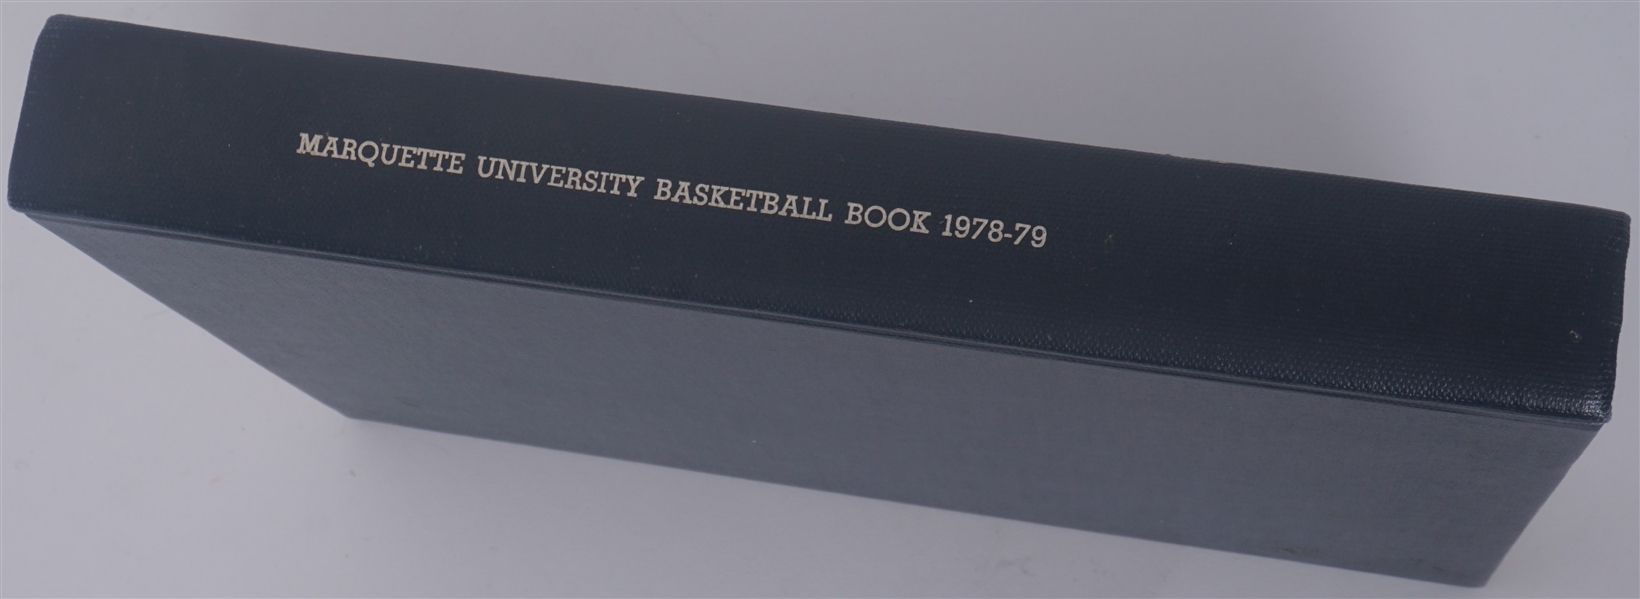 Vintage 1979 Marquette Basketball Book